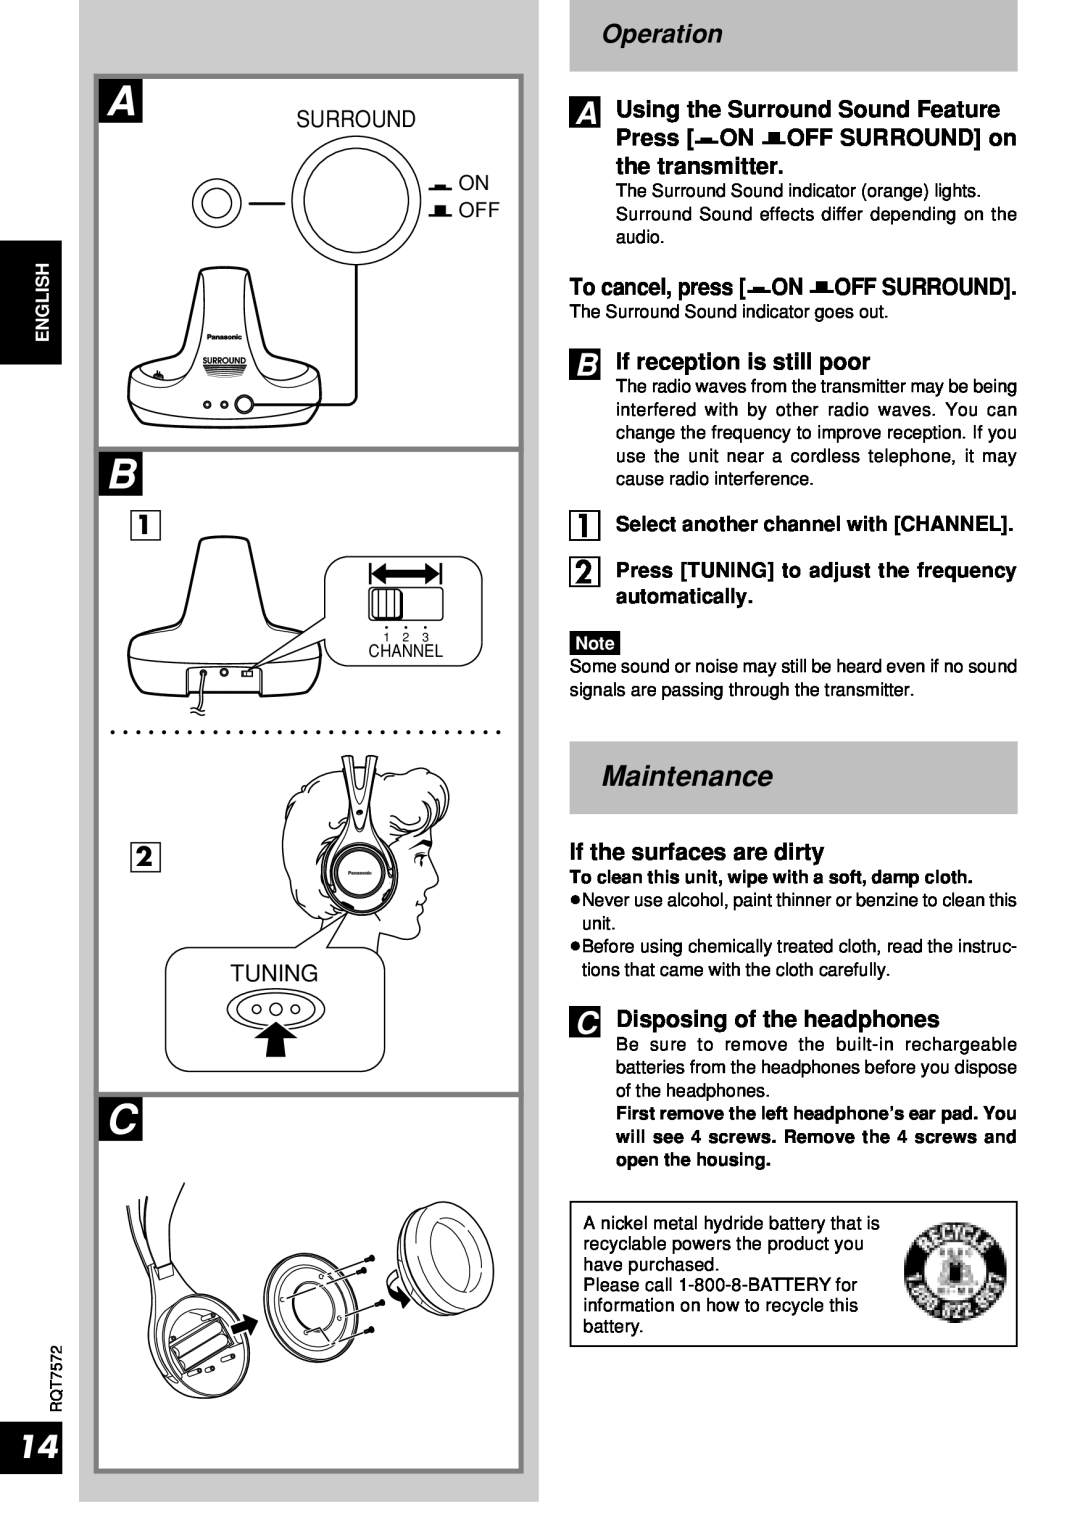 Panasonic RP-WF930 Maintenance, Operation, A Surround, …A Using the Surround Sound Feature, …If reception is still poor 